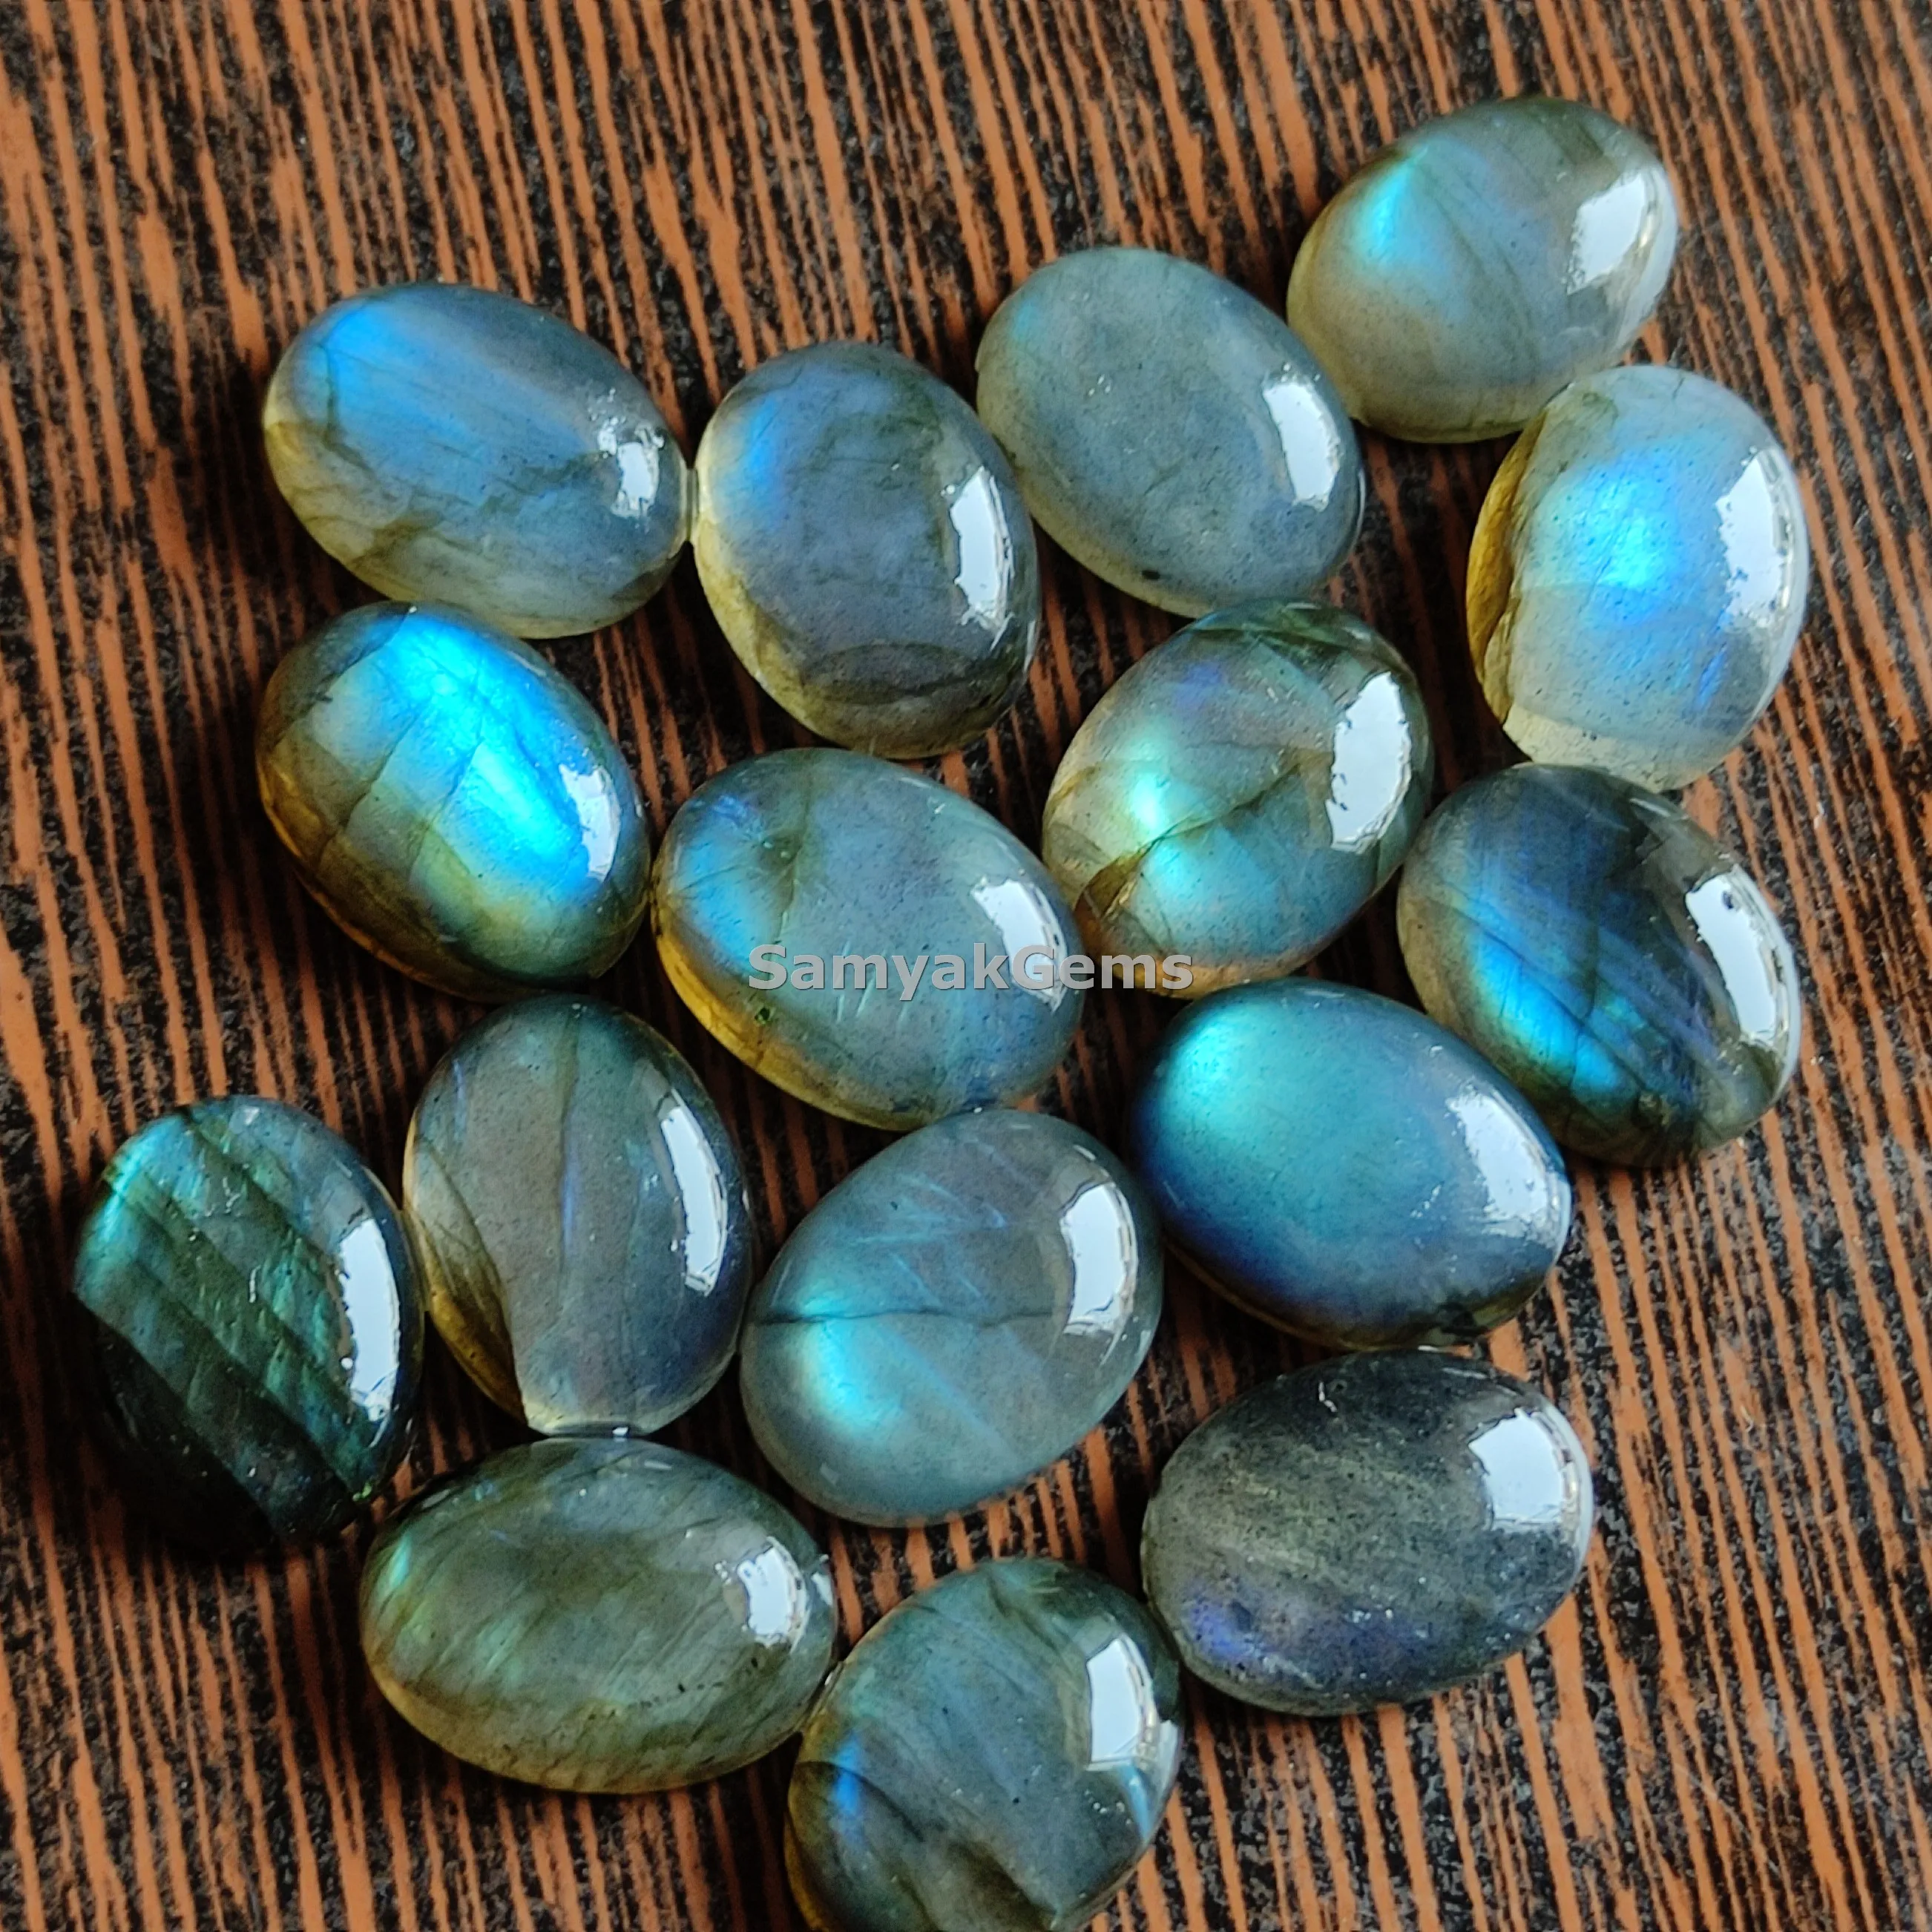 Top Quality Labradorite Blue Fire Cabochon Loose Gemstone Online Sale From Indian Moonstone manufacturer Custom Size